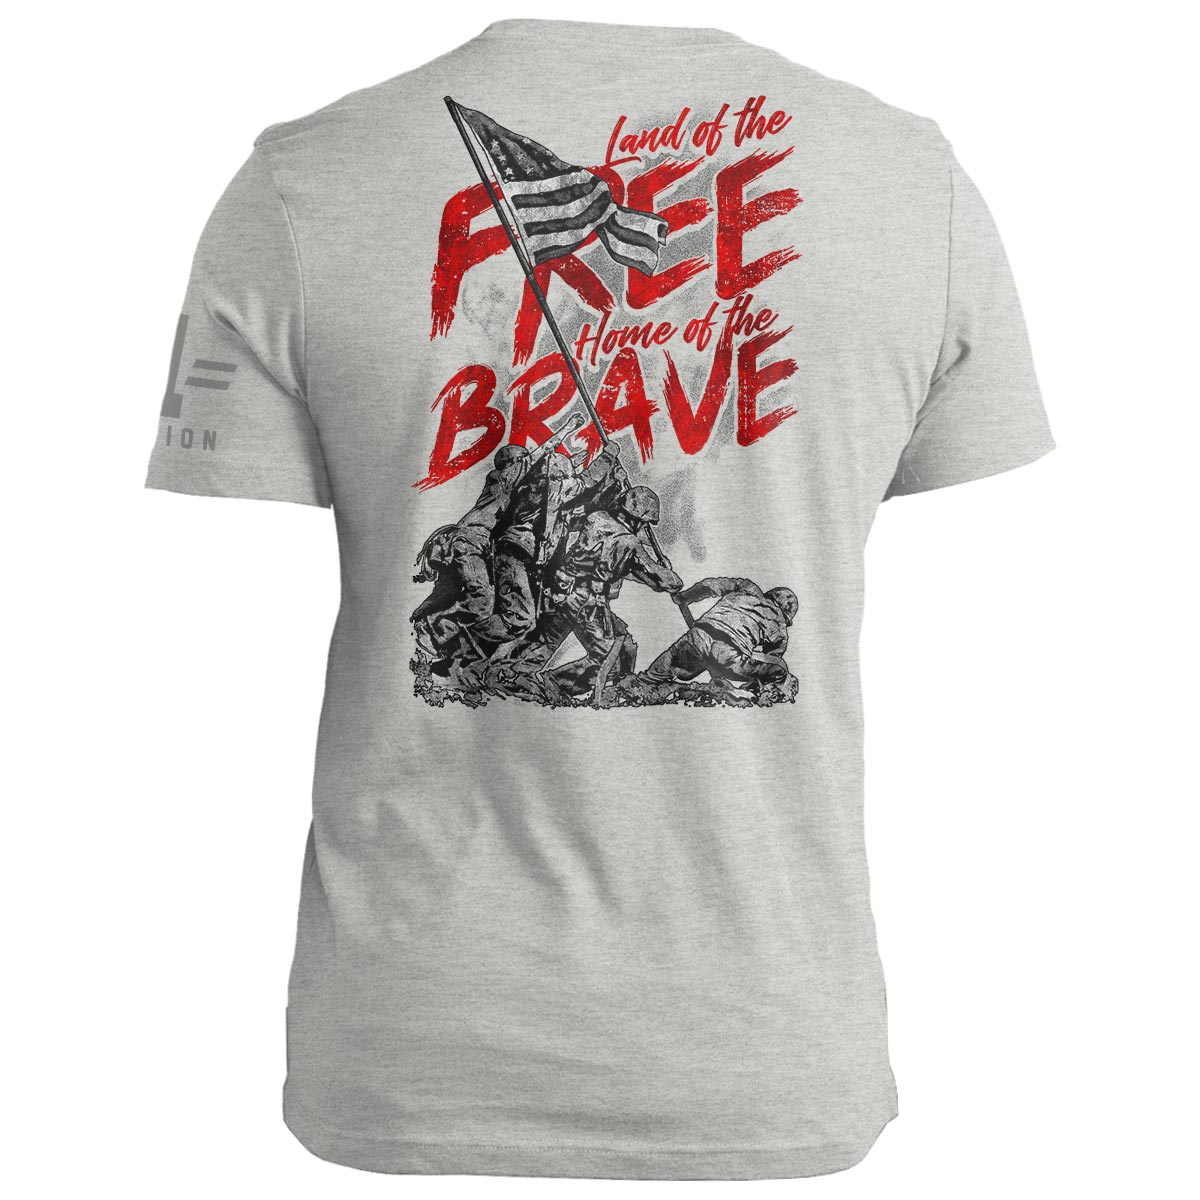 The Free. The Brave.